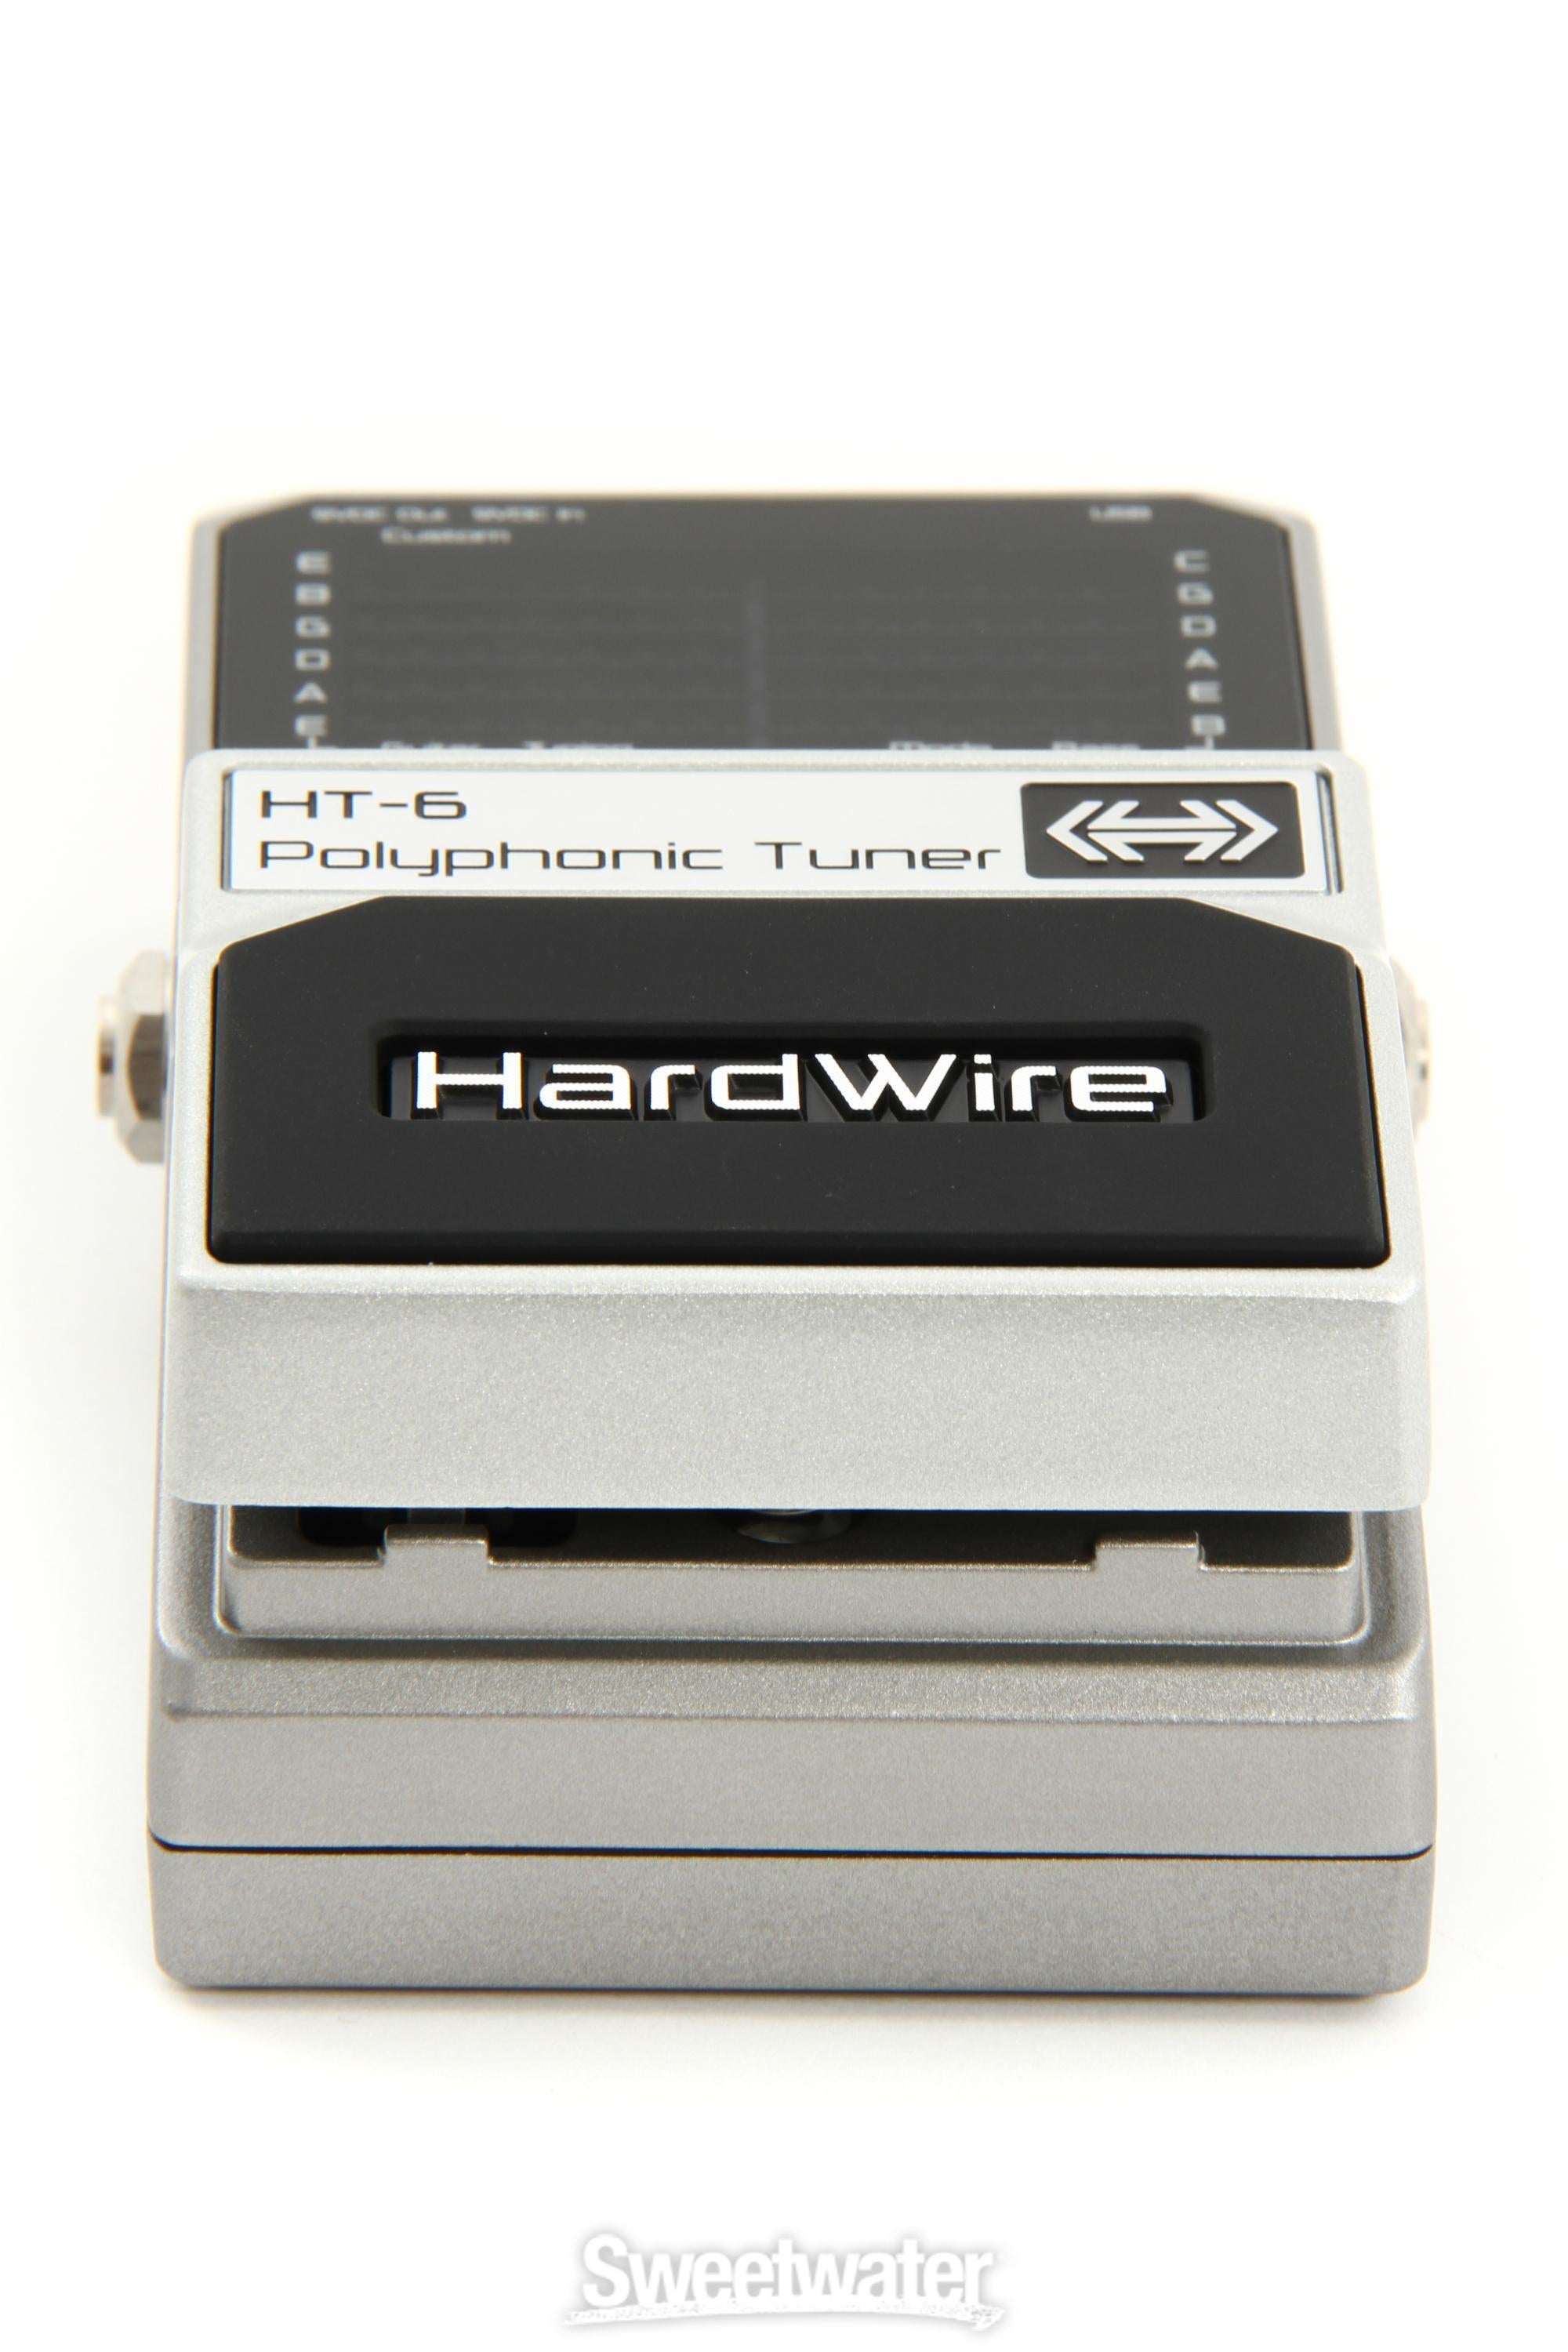 HardWire HT-6 Polyphonic Tuner | Sweetwater